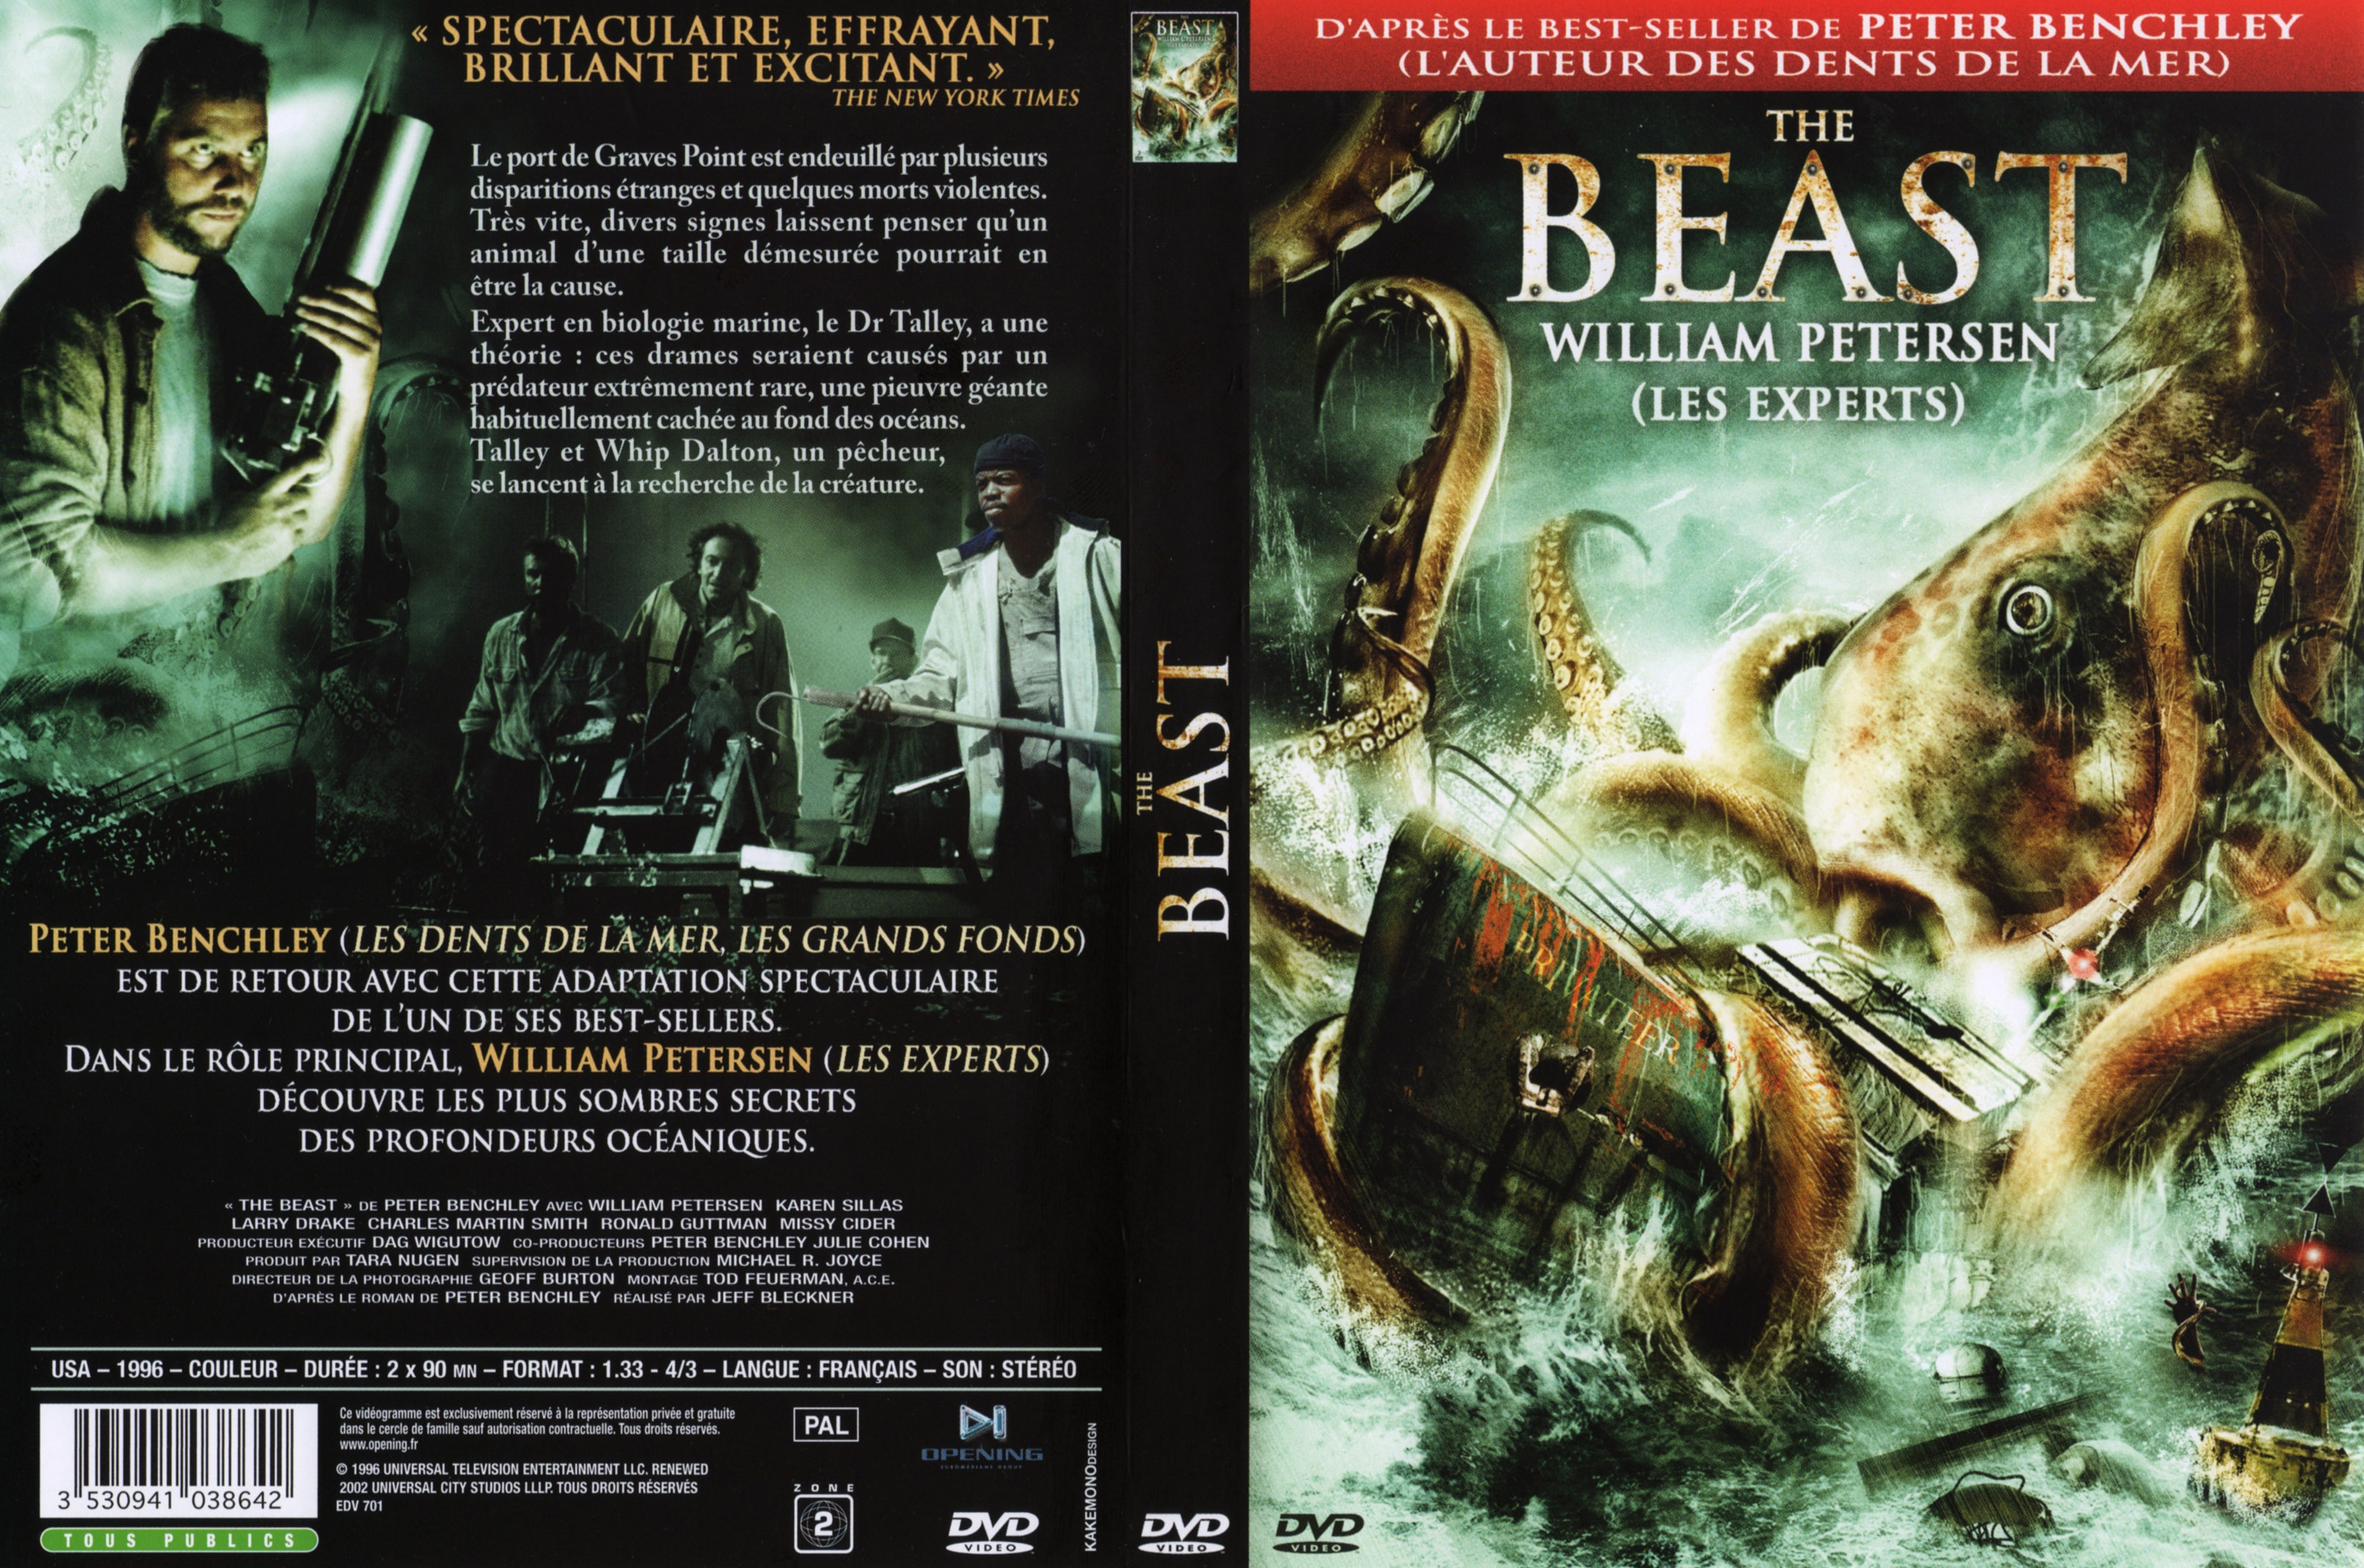 Jaquette DVD The Beast